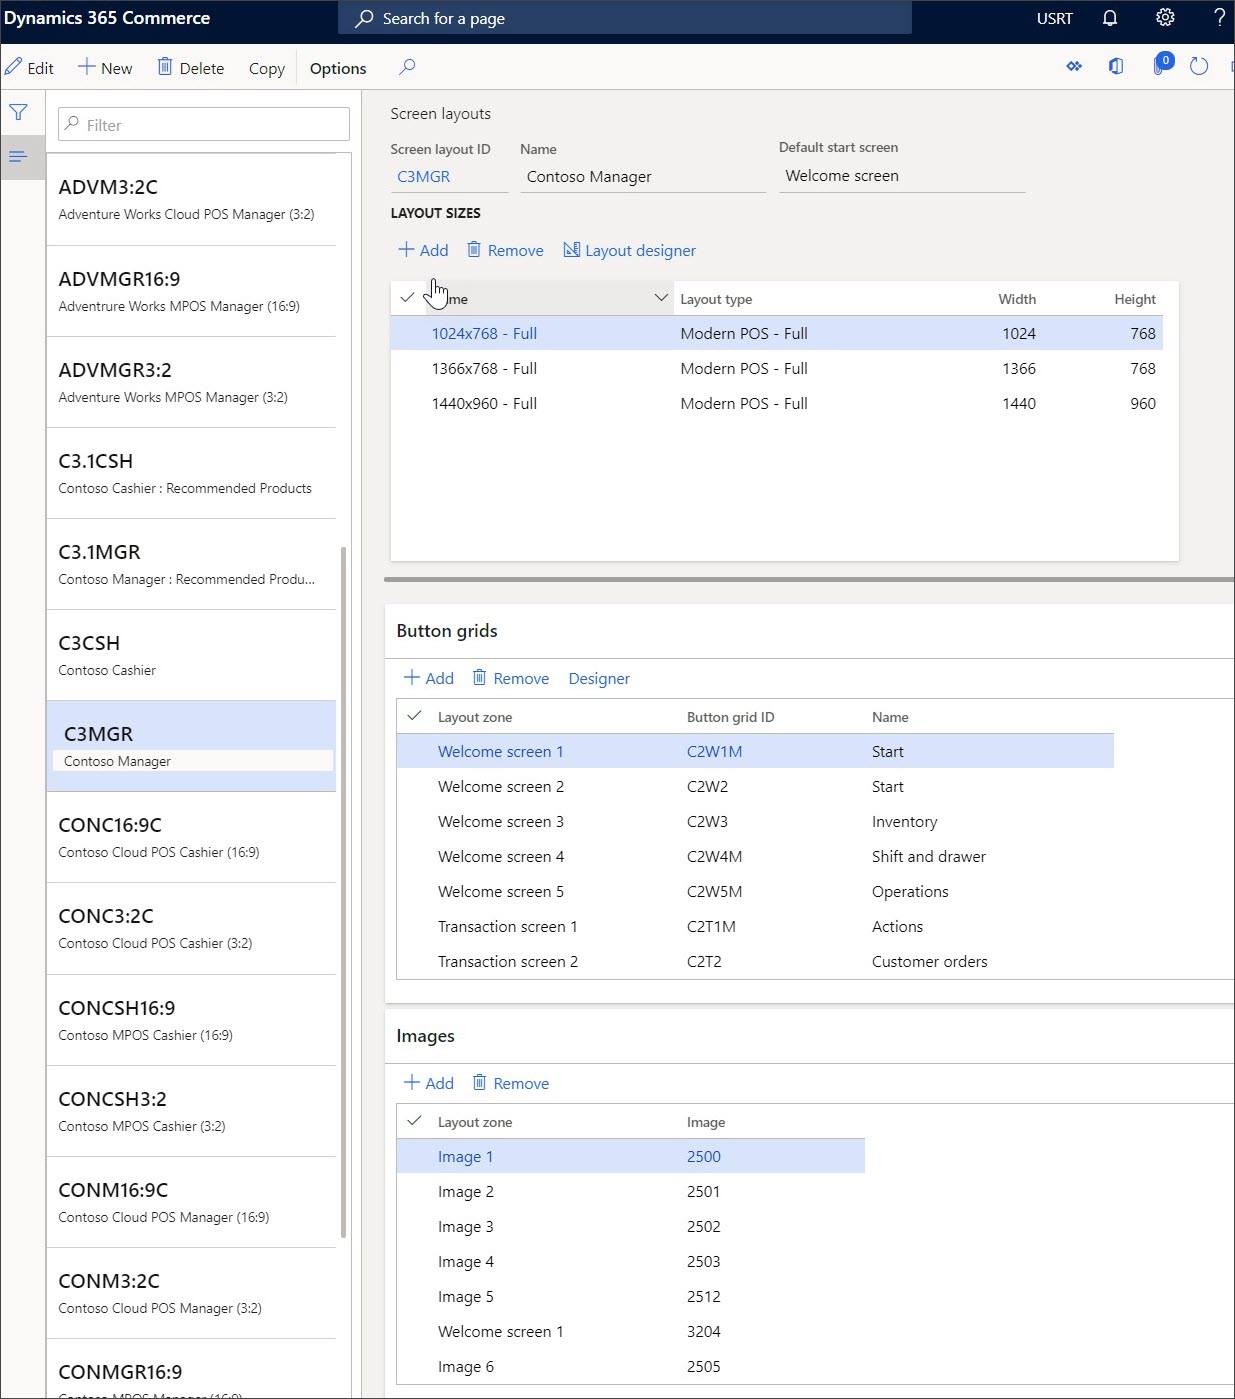 Screenshot of the Dynamics 365 Commerce Screen layouts page.